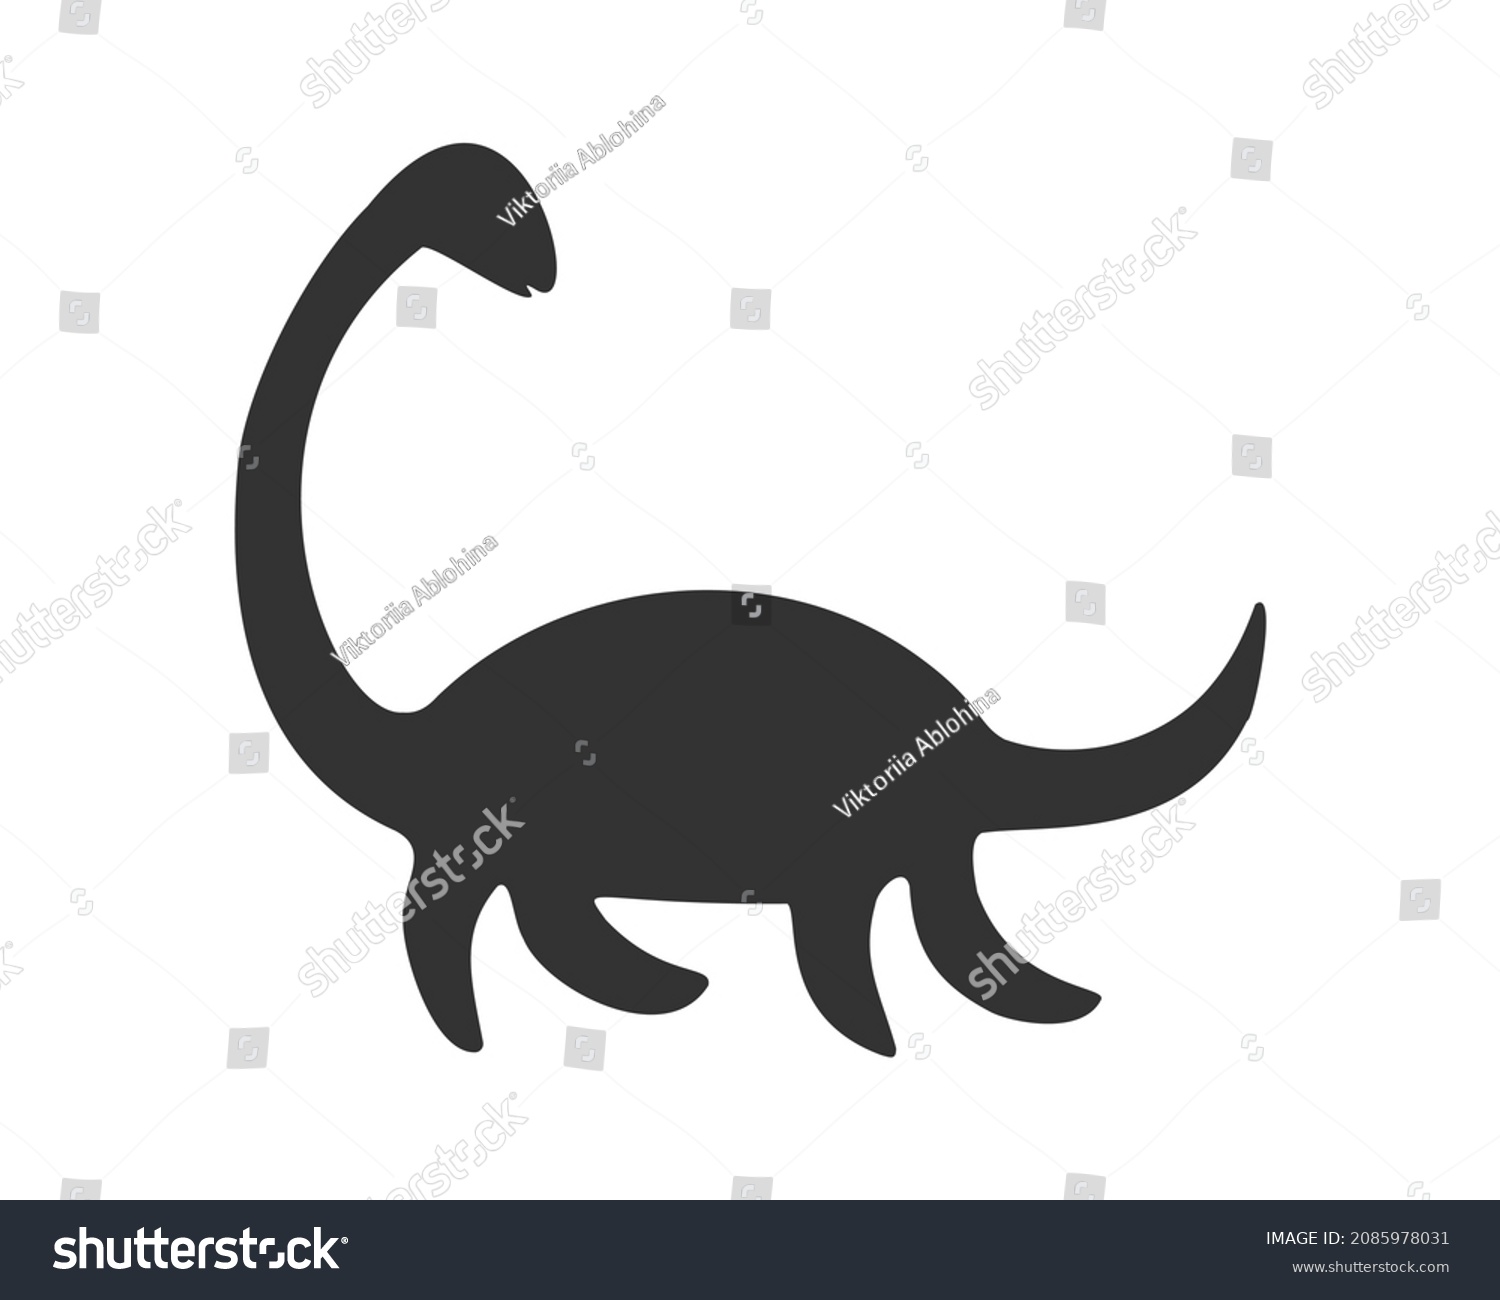 SVG of Nessie or Loch Ness monster silhouette isolated on white background. Dinosaur plesiosaur icon. Vector graphic illustration. svg